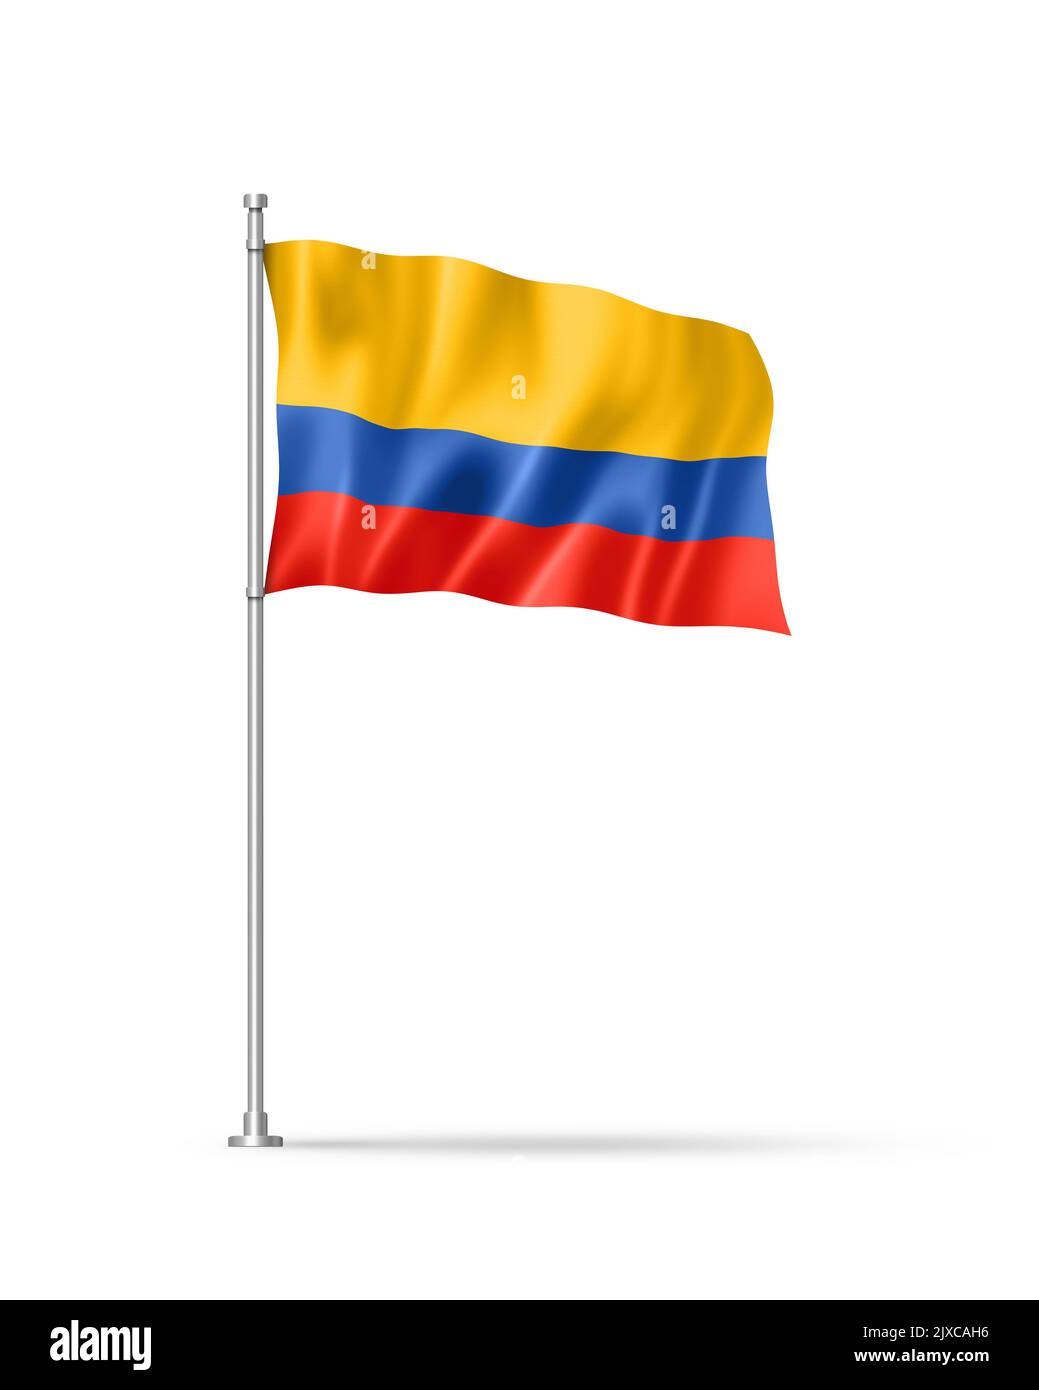 Colombia flag, 3D illustration, isolated on white Stock Photo